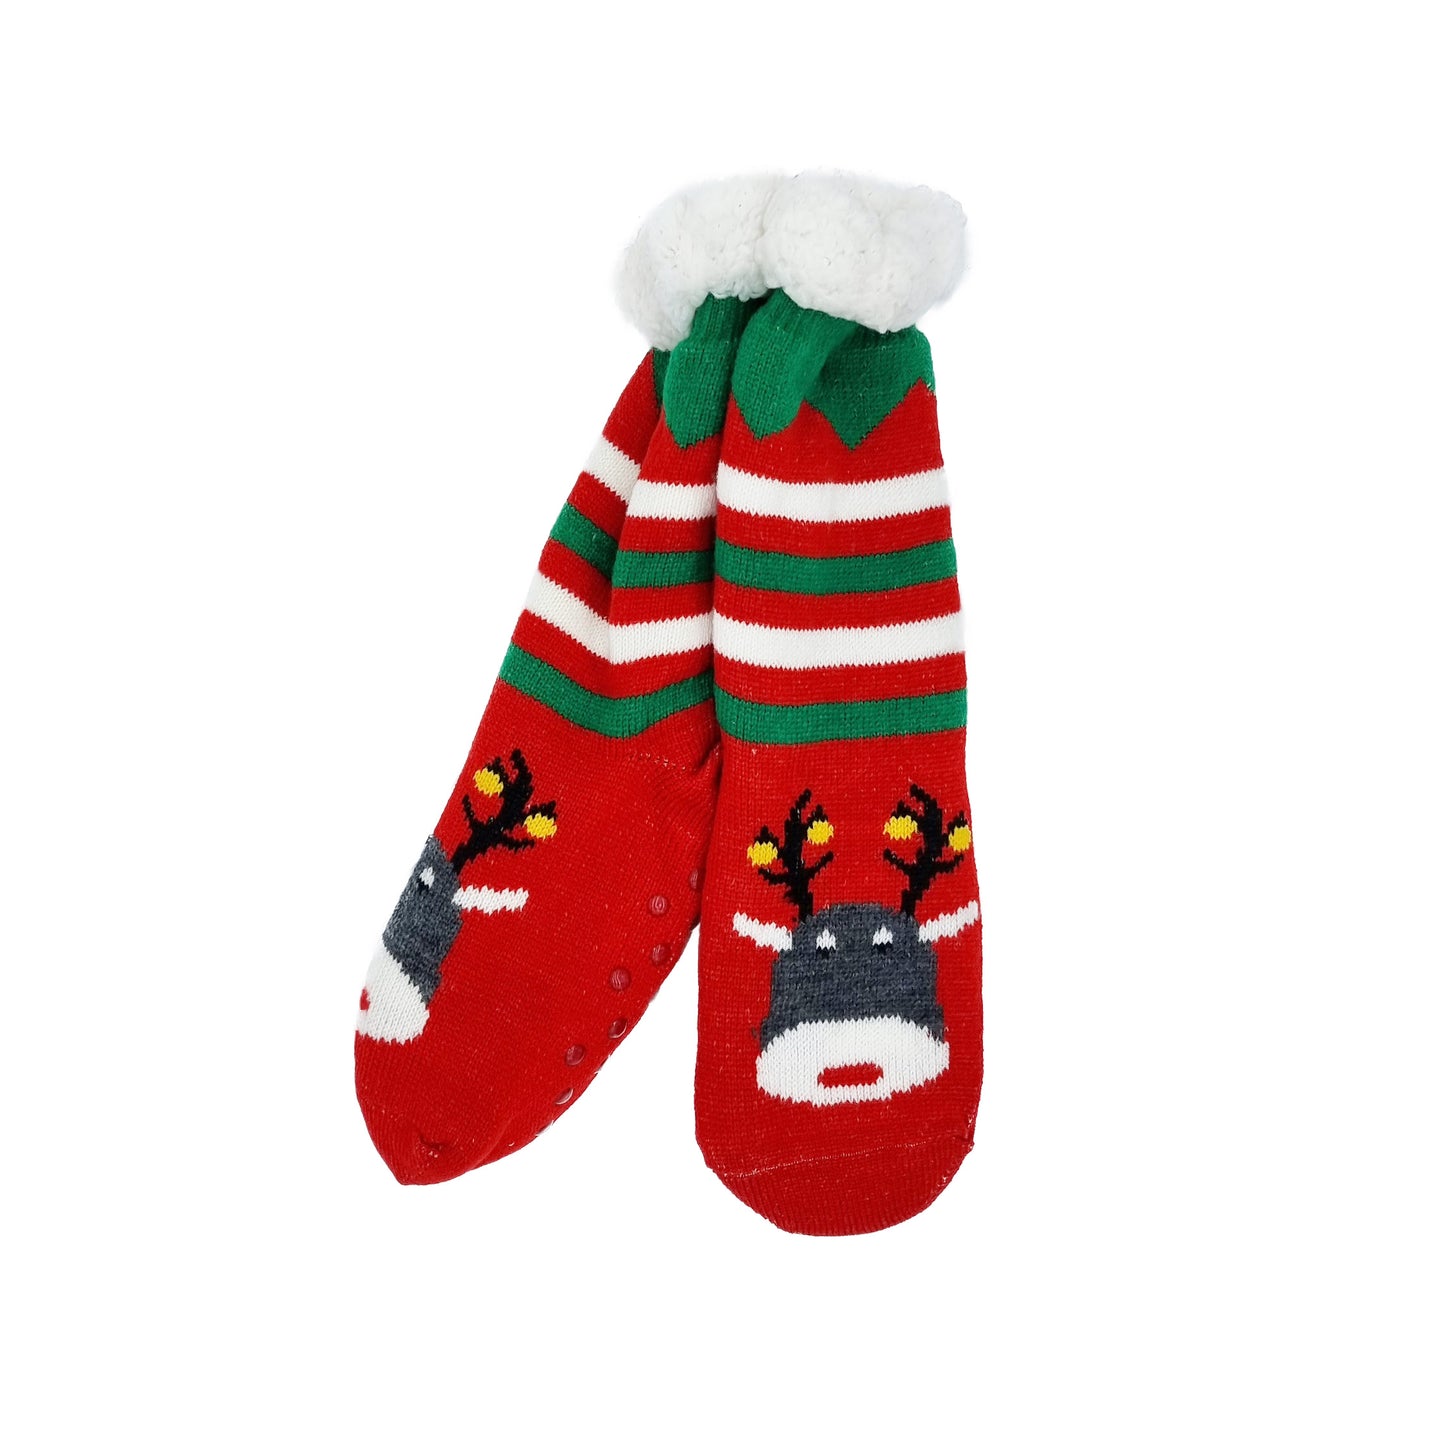 Chaussettes antidérapantes "Rudolph"